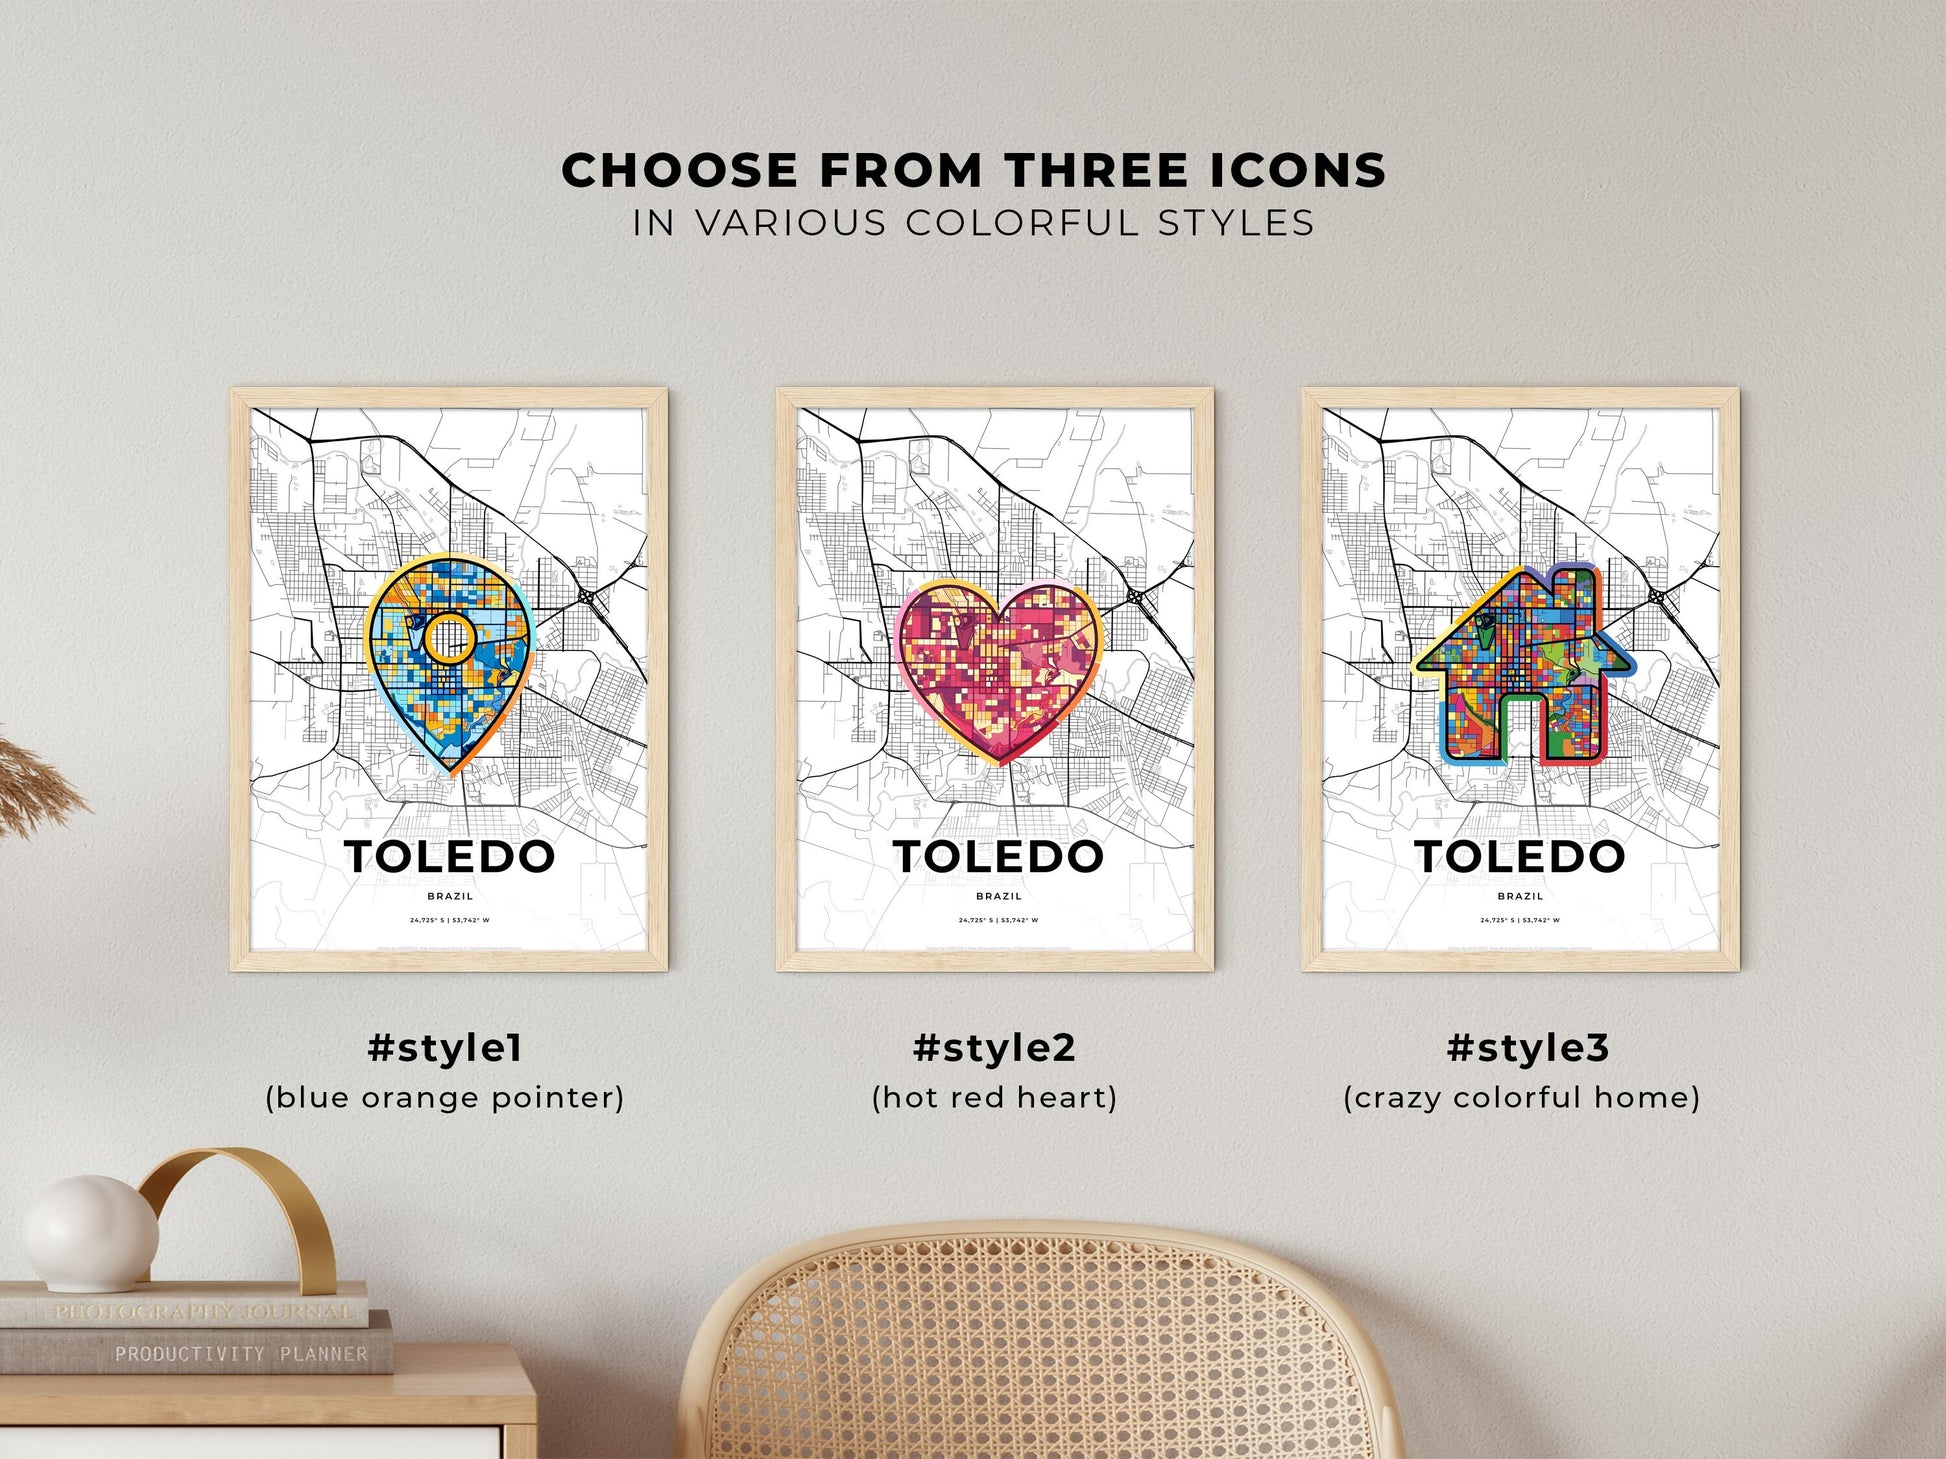 TOLEDO BRAZIL minimal art map with a colorful icon. Where it all began, Couple map gift.